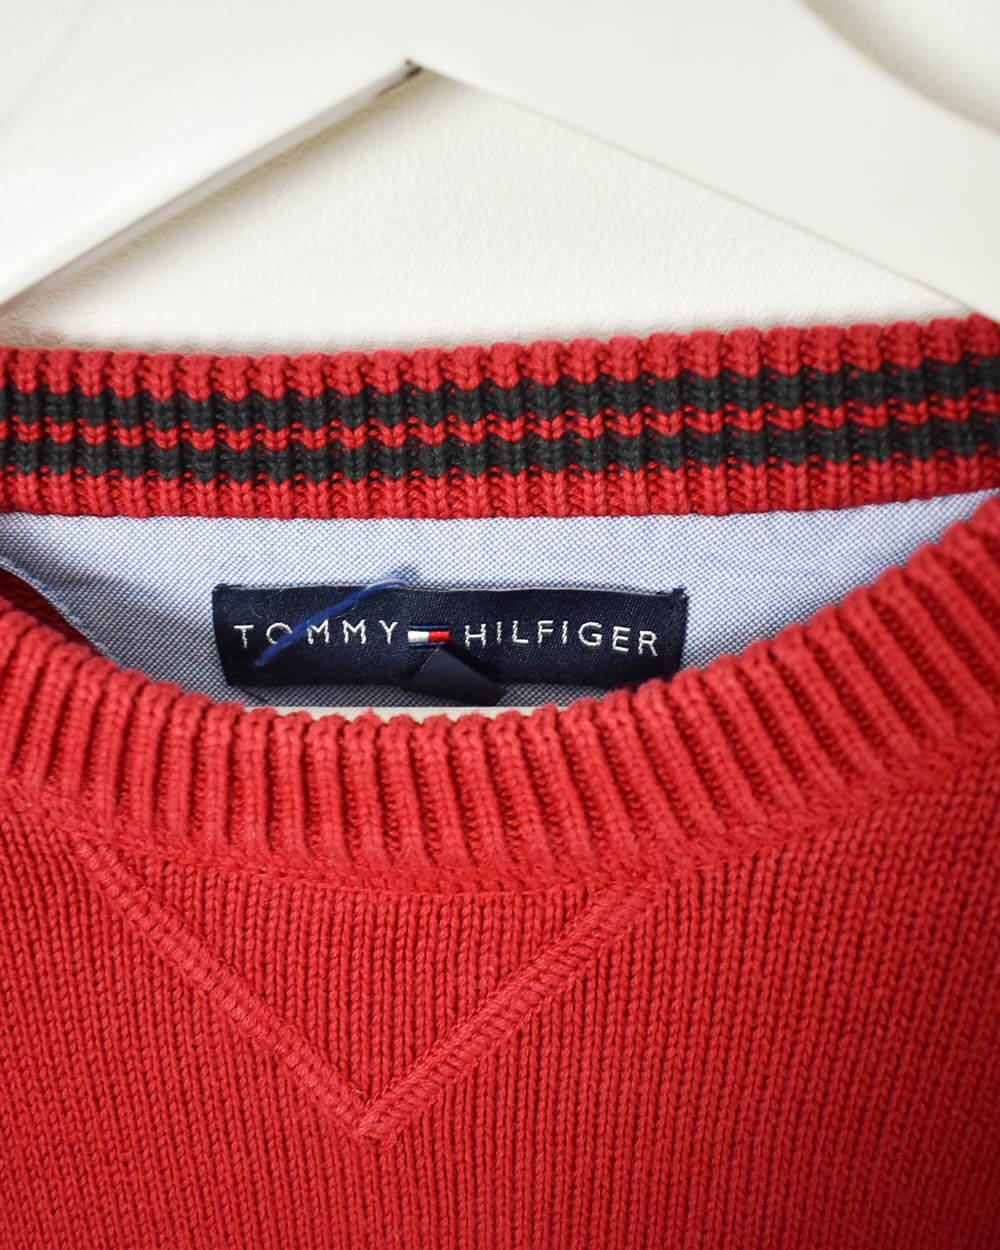 Red Tommy Hilfiger Knitted Sweatshirt - X-Large